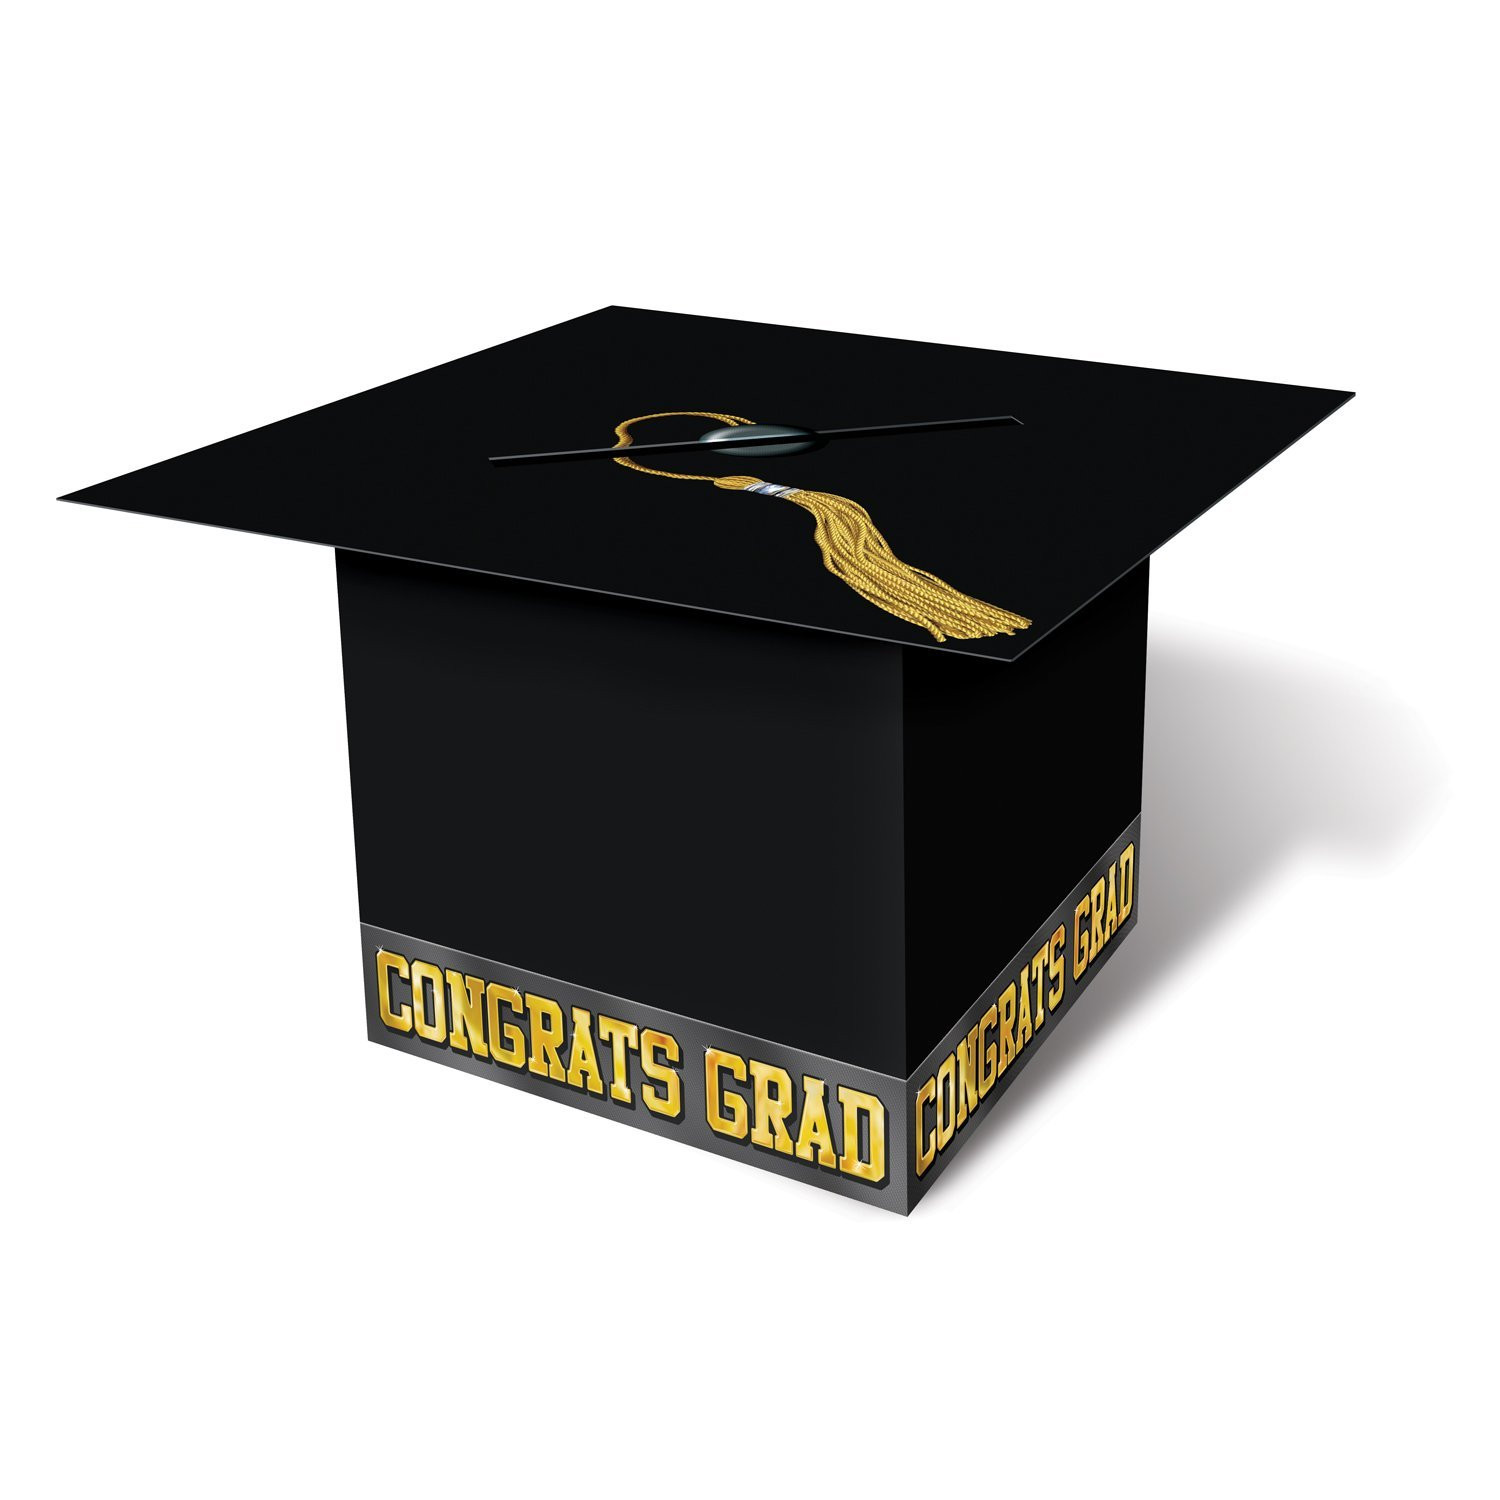 Card Box Ideas For Graduation Party
 4 Things You Need To Throw A Graduation Party